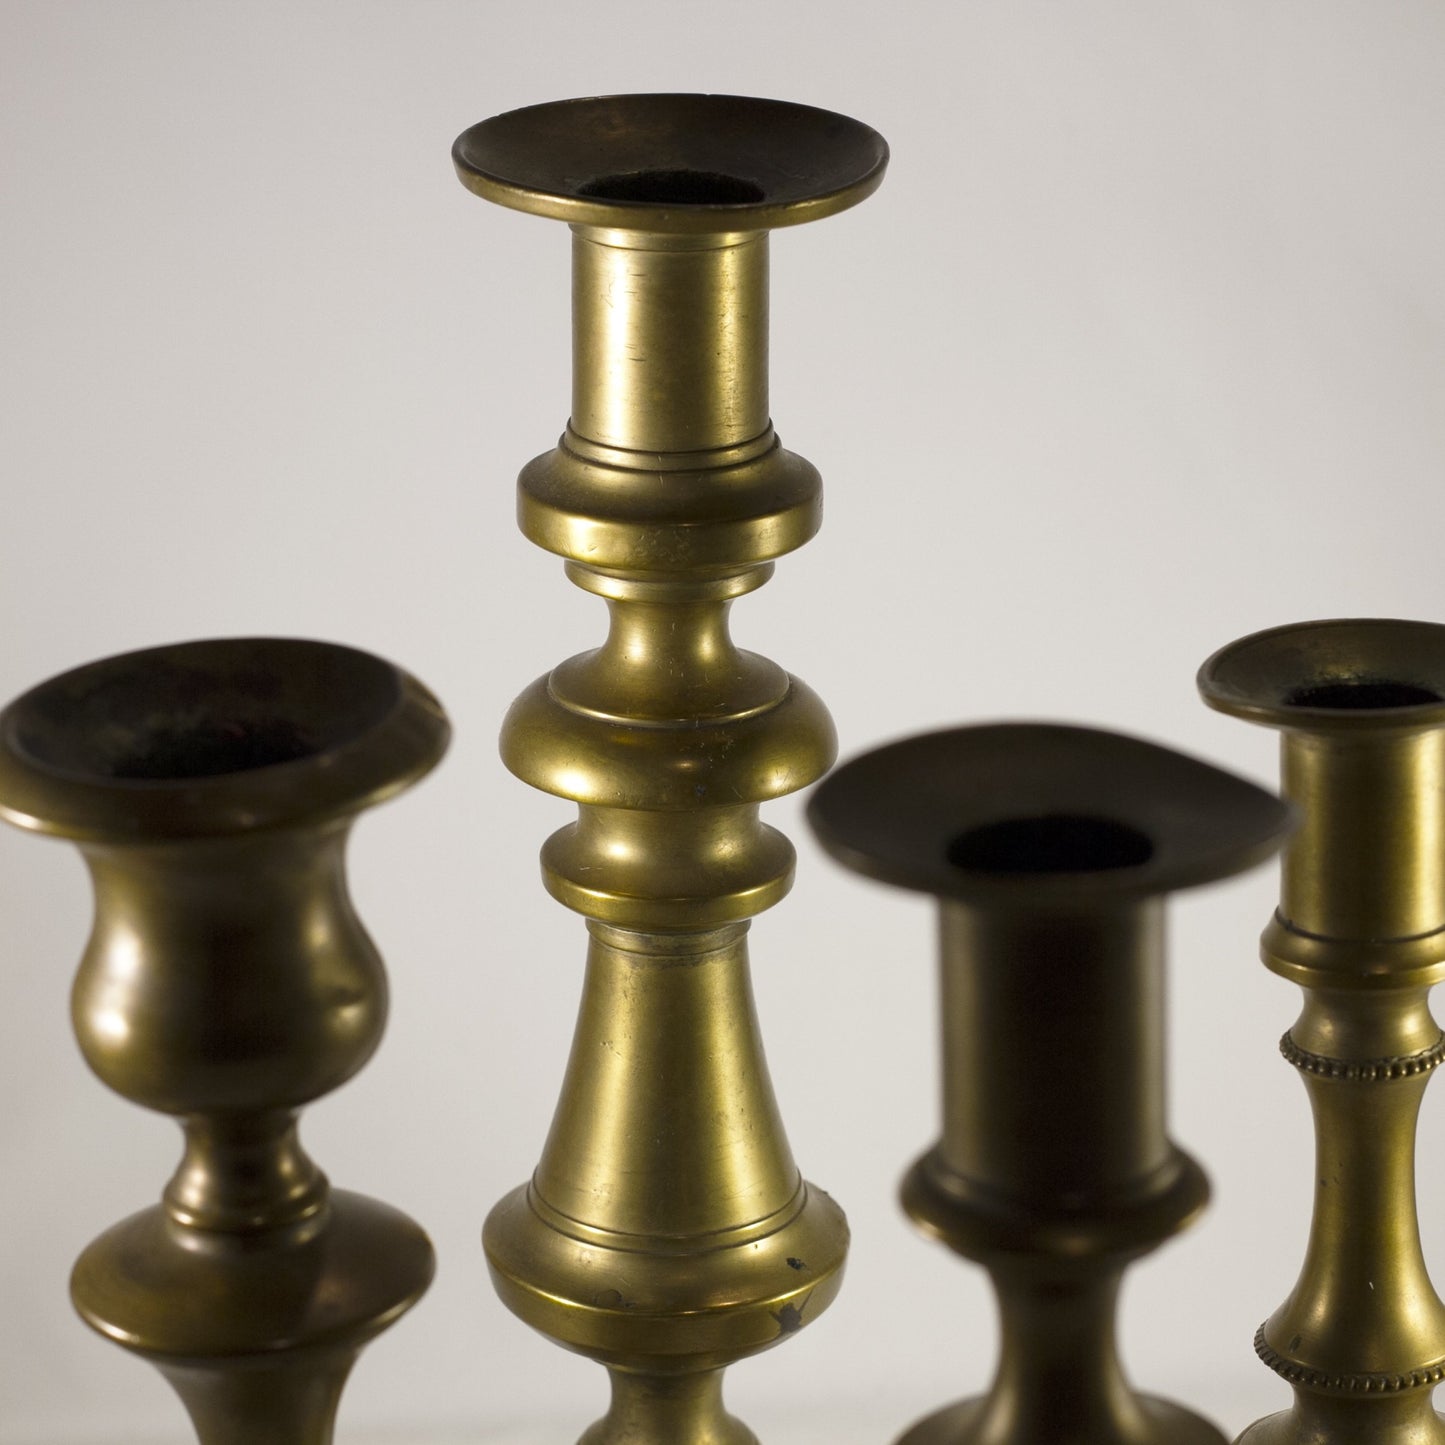 Set of Four Early 19th Century Brass Pricket Candlesticks, Circa